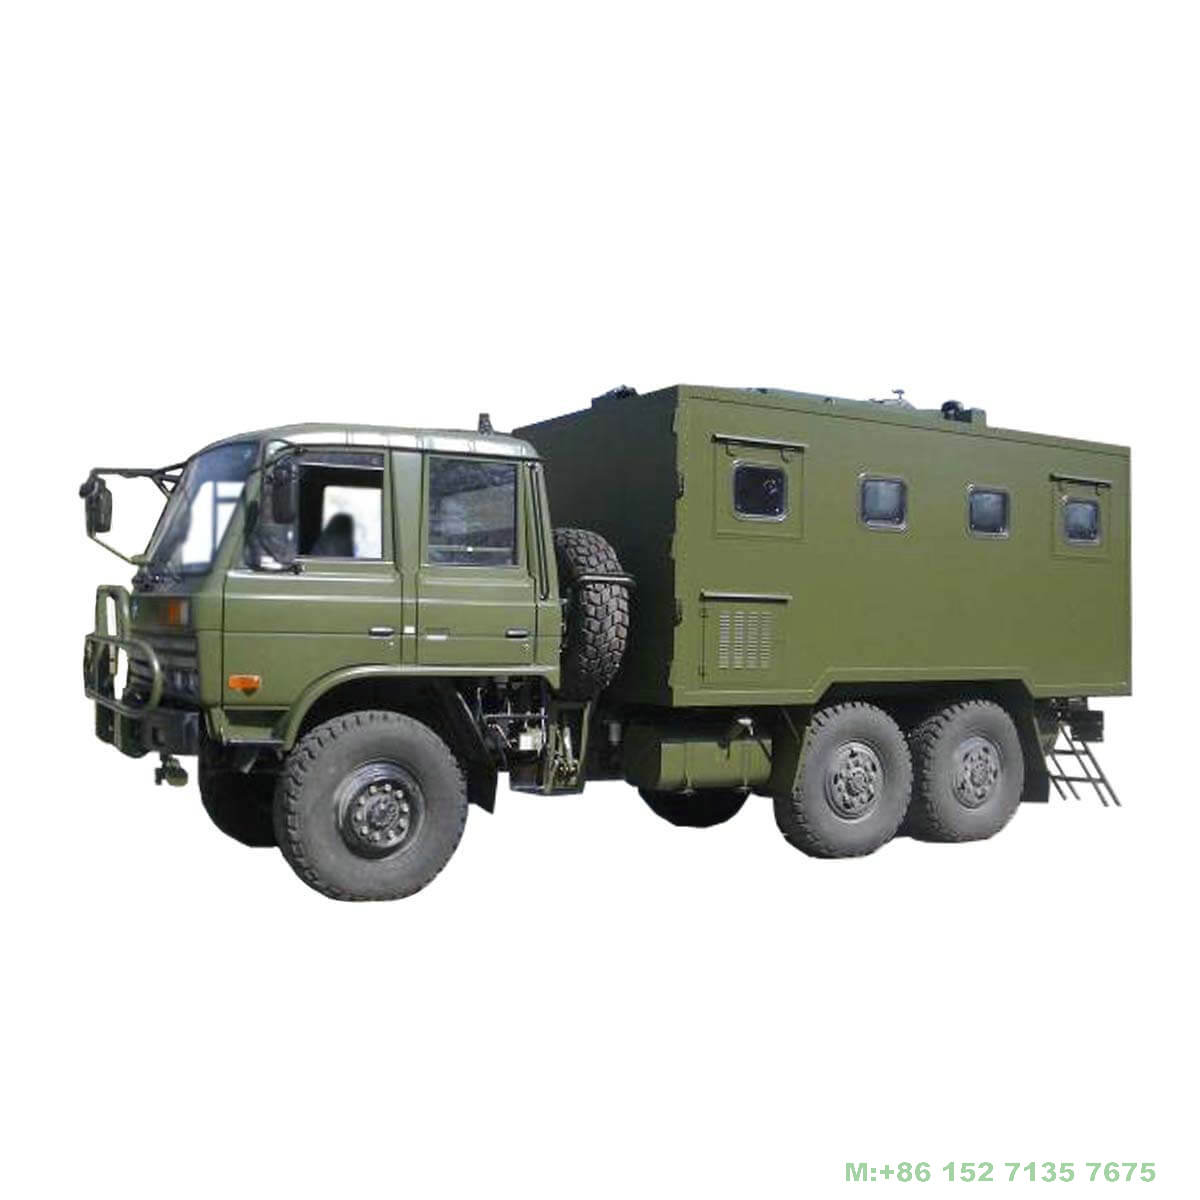 Dongfeng 6x6 Offroad Mobile Showers Vehicle